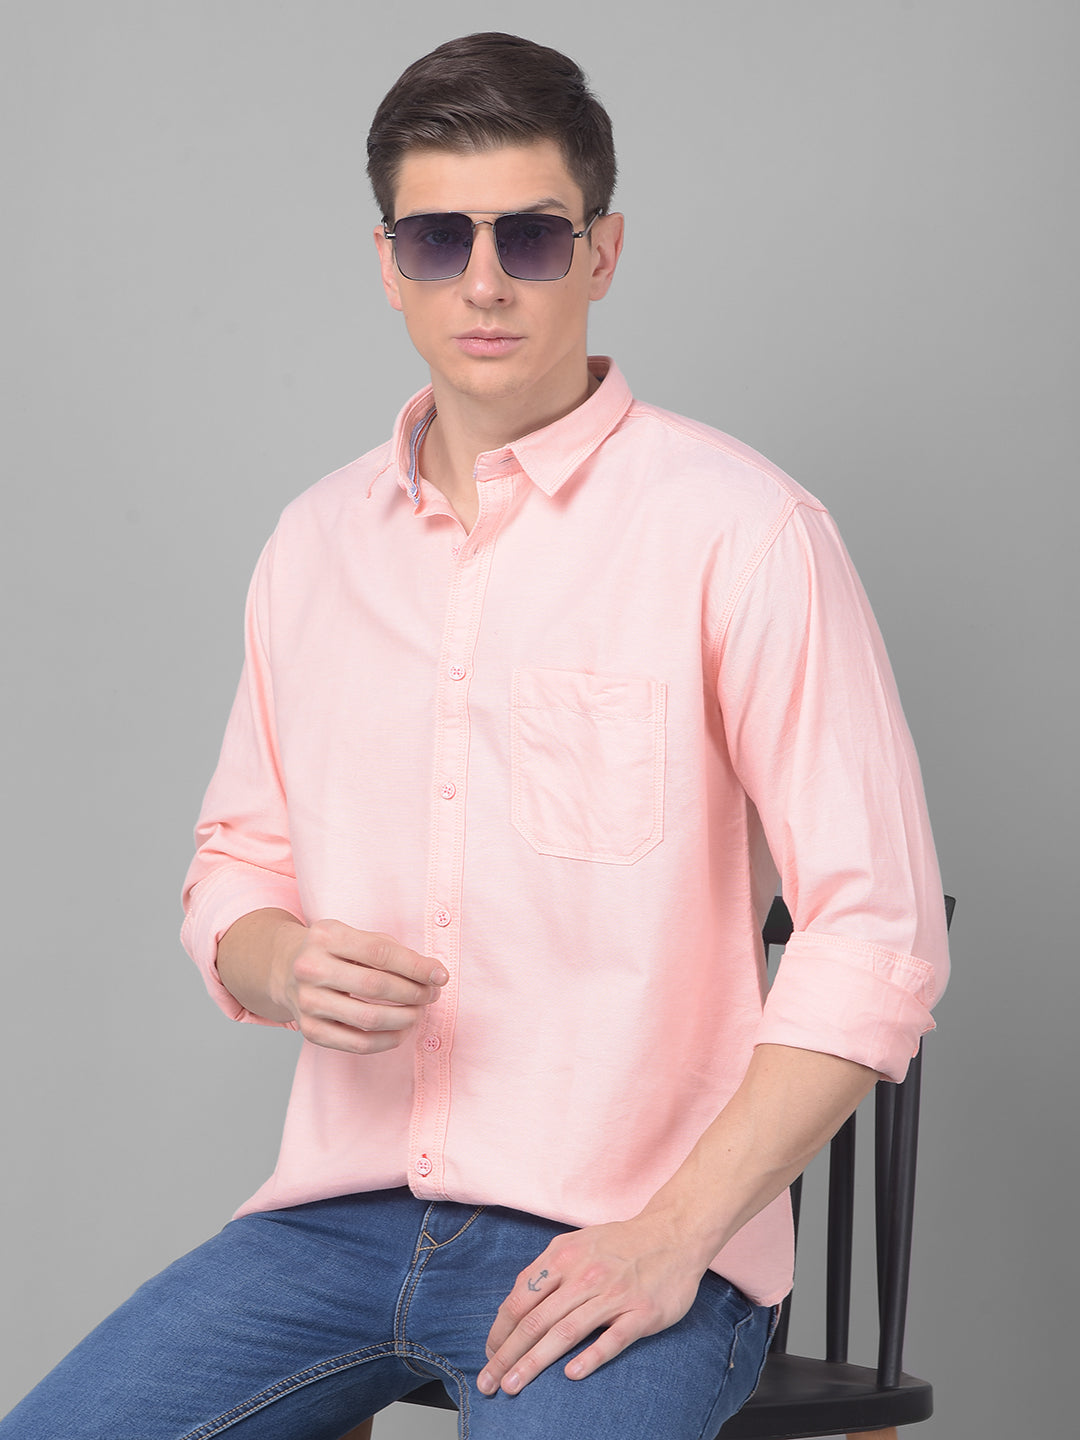 Image Guy Blue Jeans Pink Shirt Stock Photo 133601426 | Shutterstock